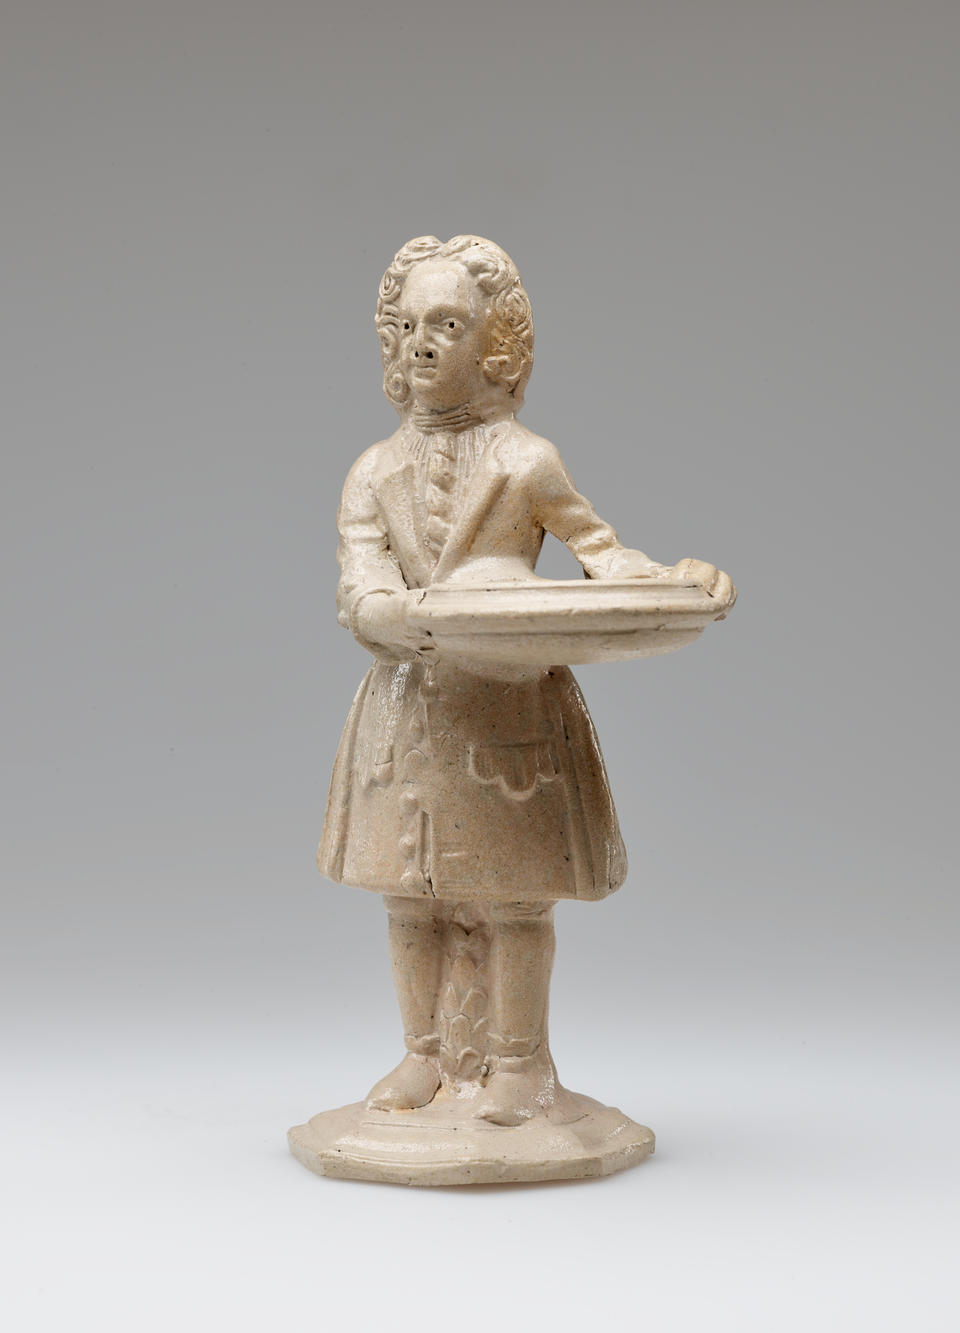 A sculptural figure standing, holding a vessel, dressed in historical clothing with tightly curled hair. The entire stoneware figure is a light cream color.